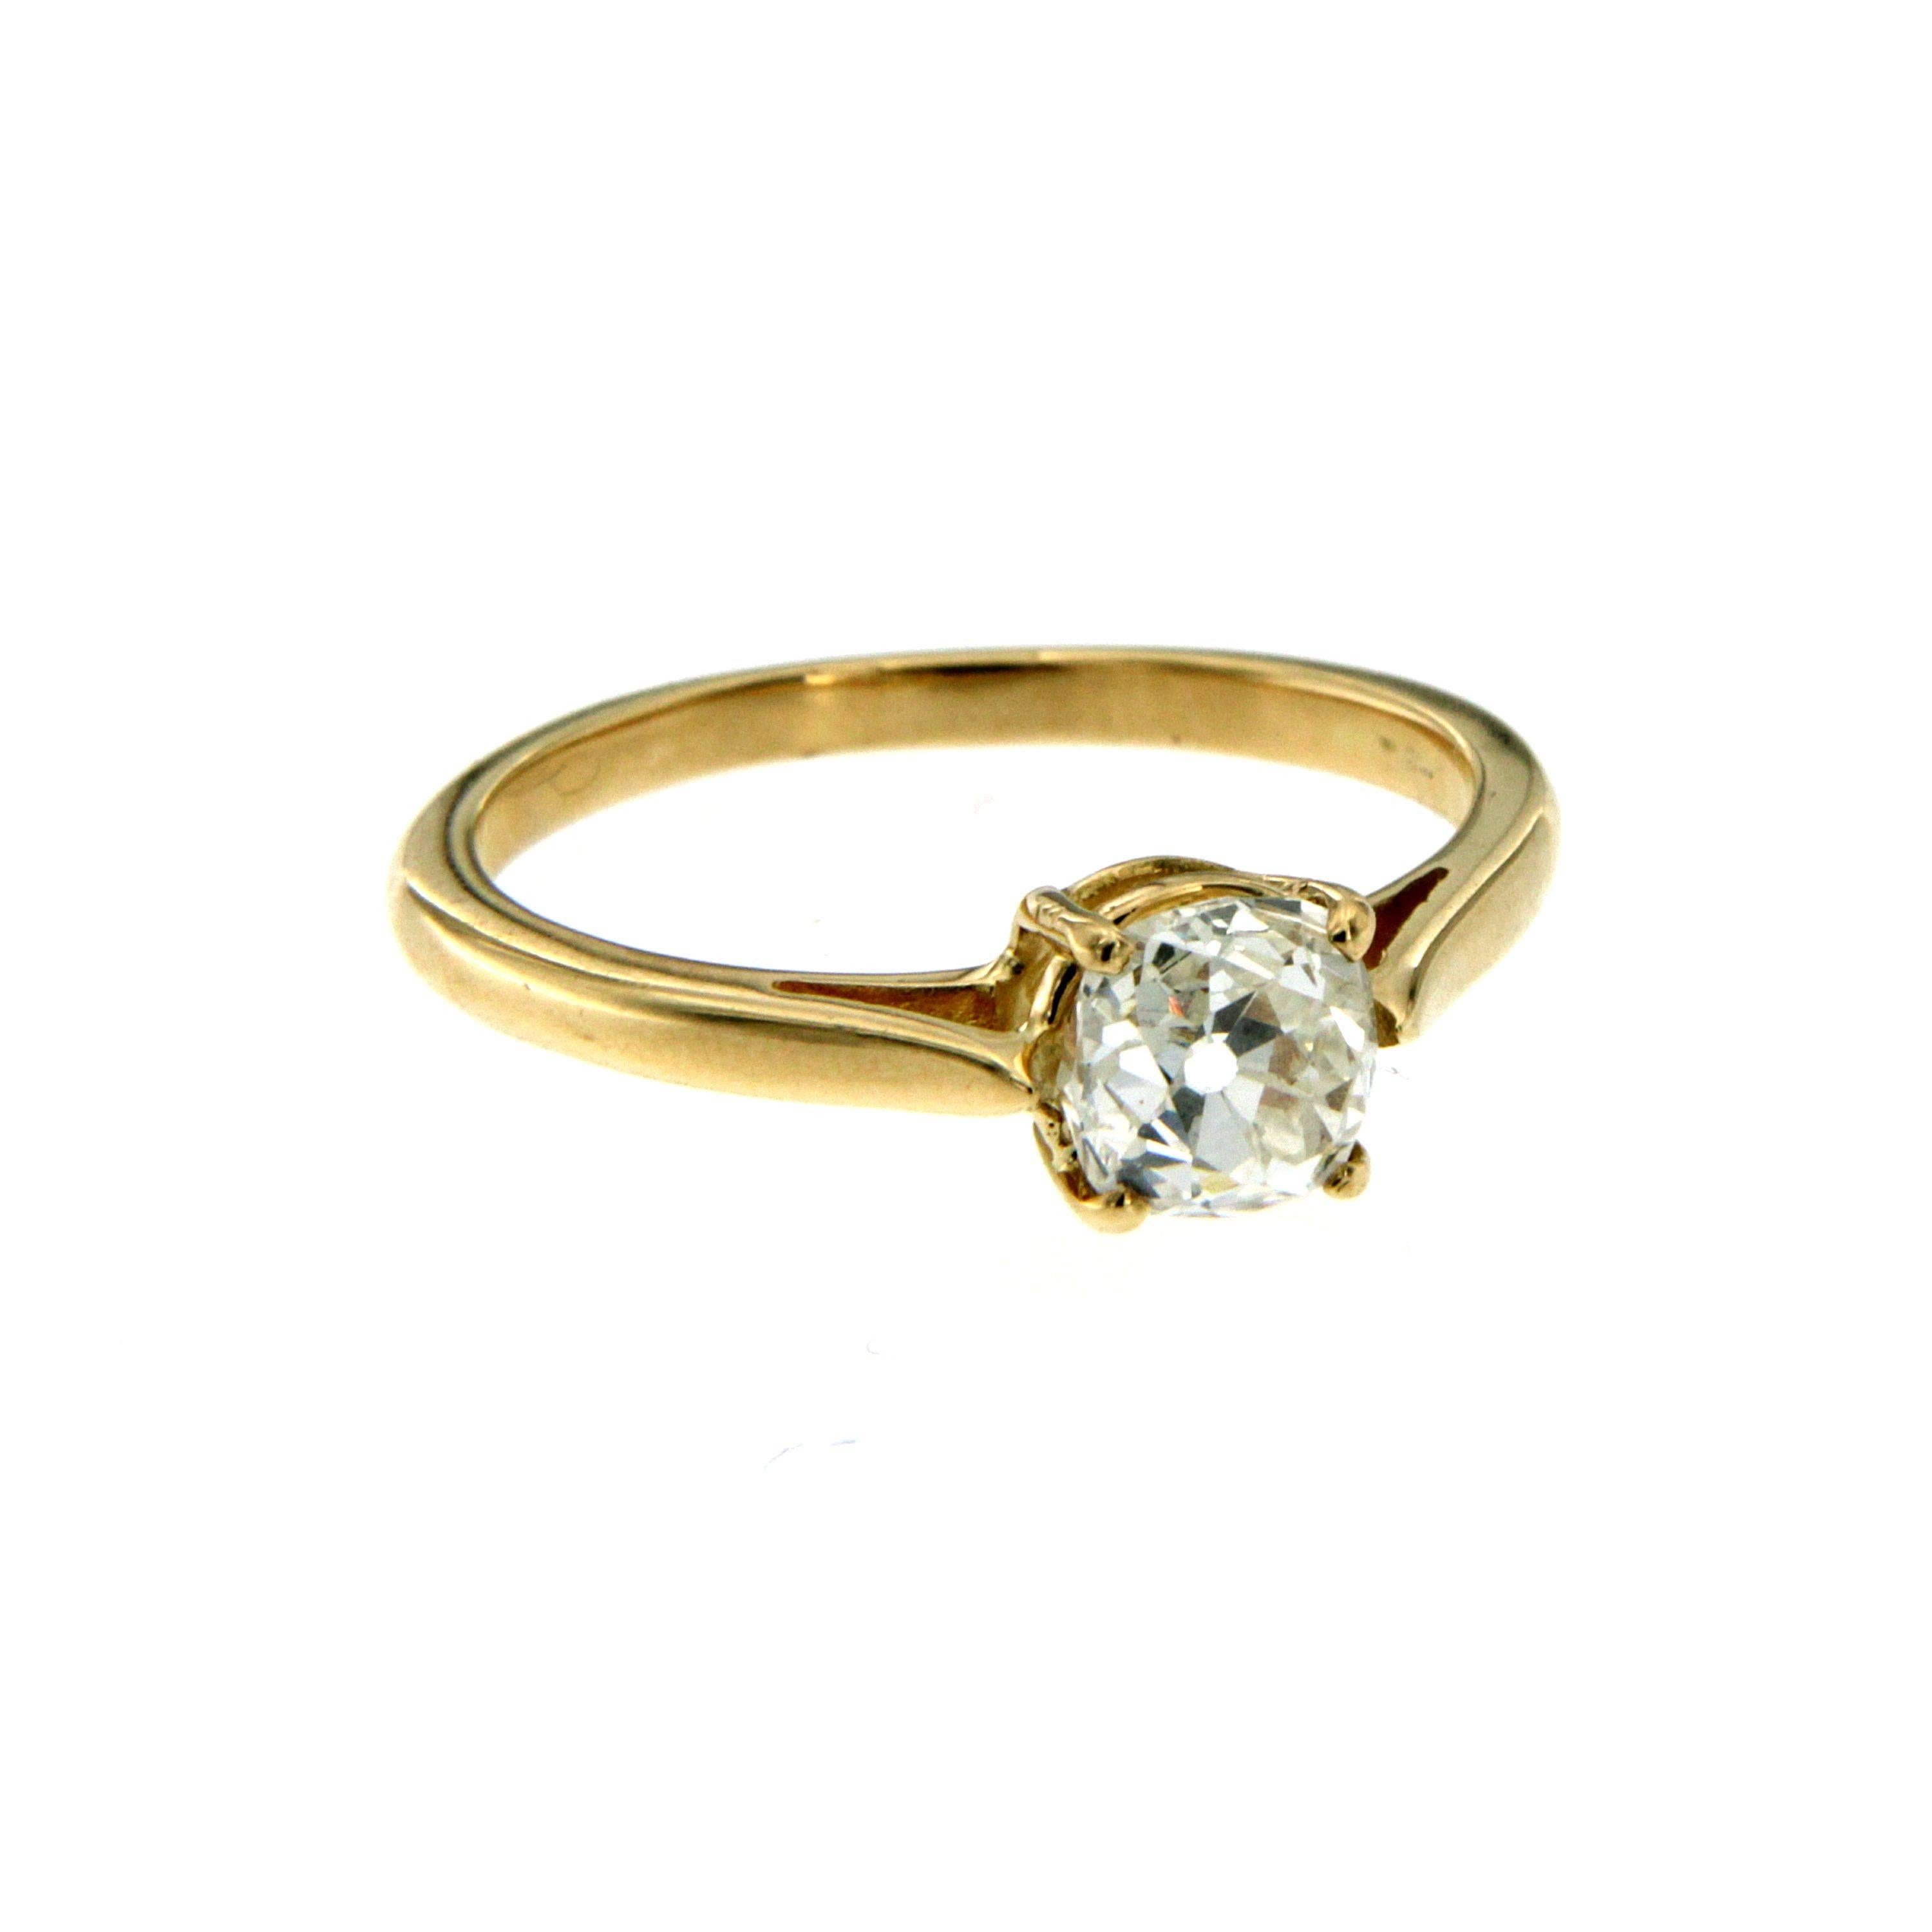 Exquisite and elegant Engagement ring, handmade in solid 18k yellow gold, dates 1940, perfect for everyday use

It is set with one sparkling European cut Diamond of 1.13 carat, graded H/I color vvs

CONDITION: Pre-Owned - Excellent 
METAL: 18k